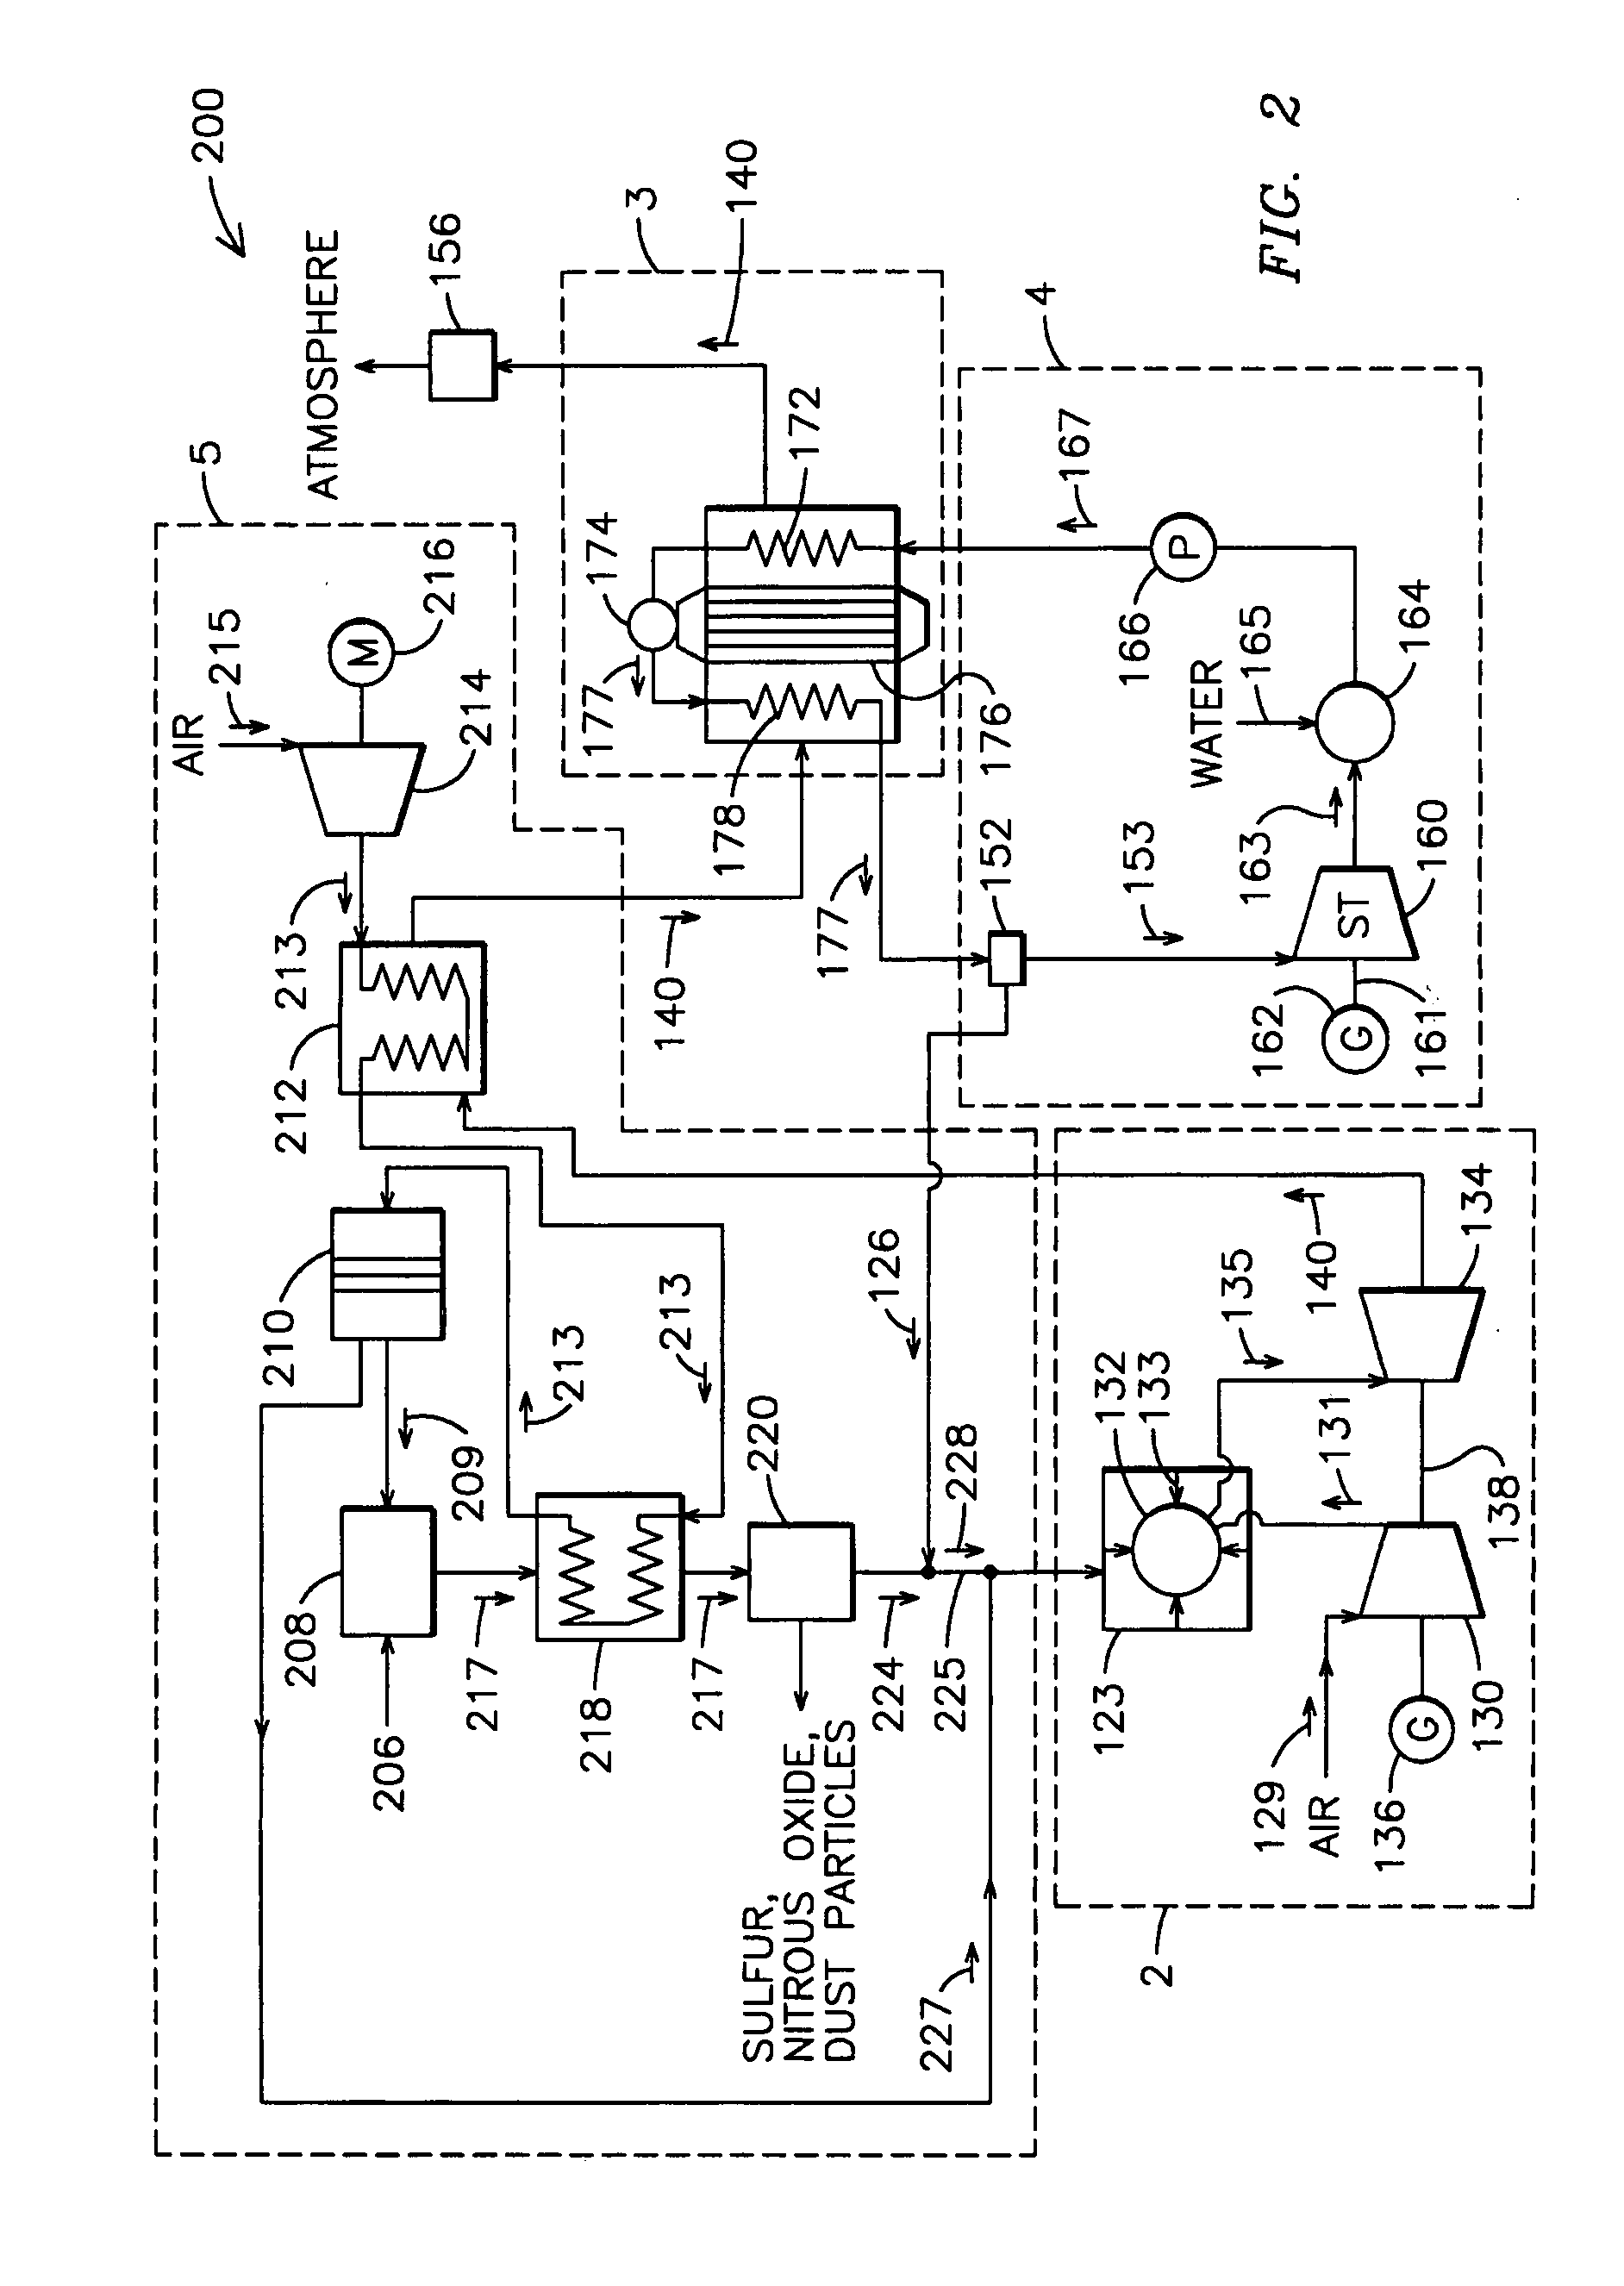 System and method for oxygen separation in an integrated gasification combined cycle system